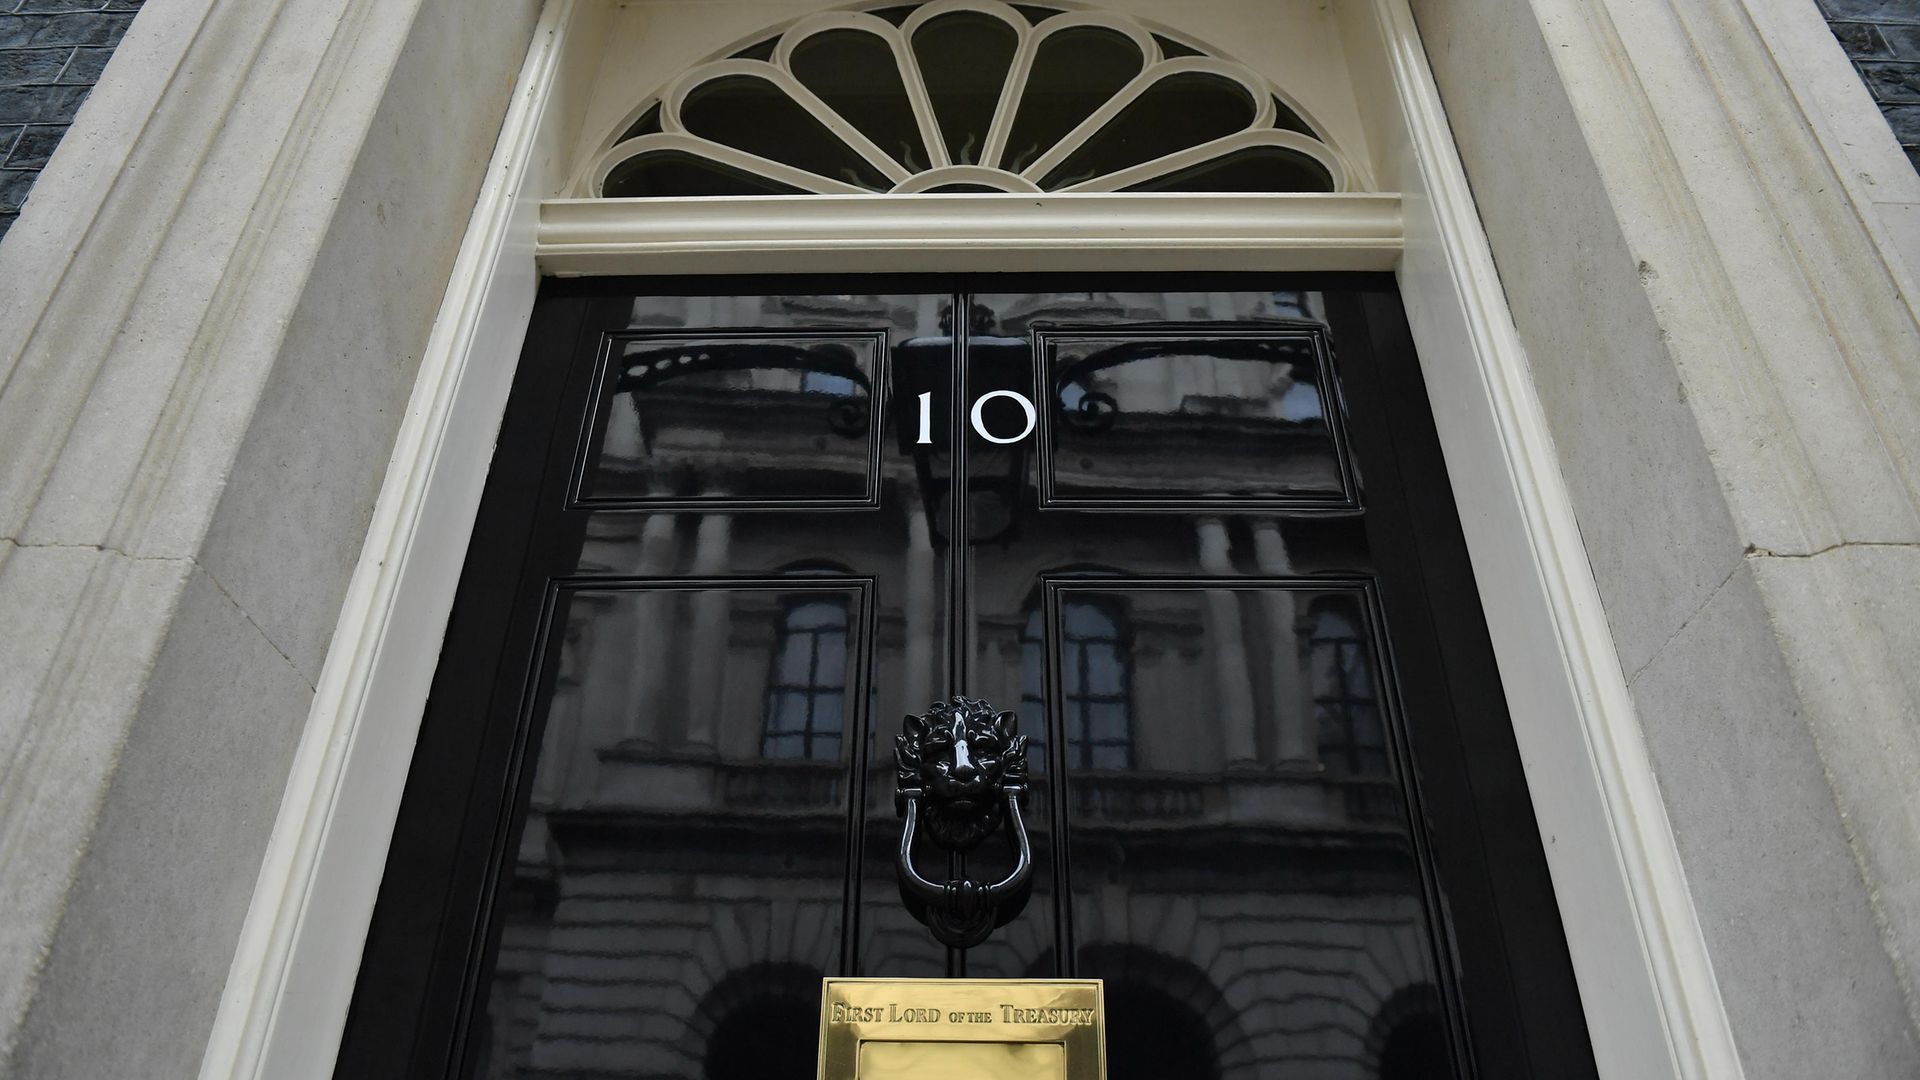 The front door of number 10 Downing Street in London. - Credit: PA